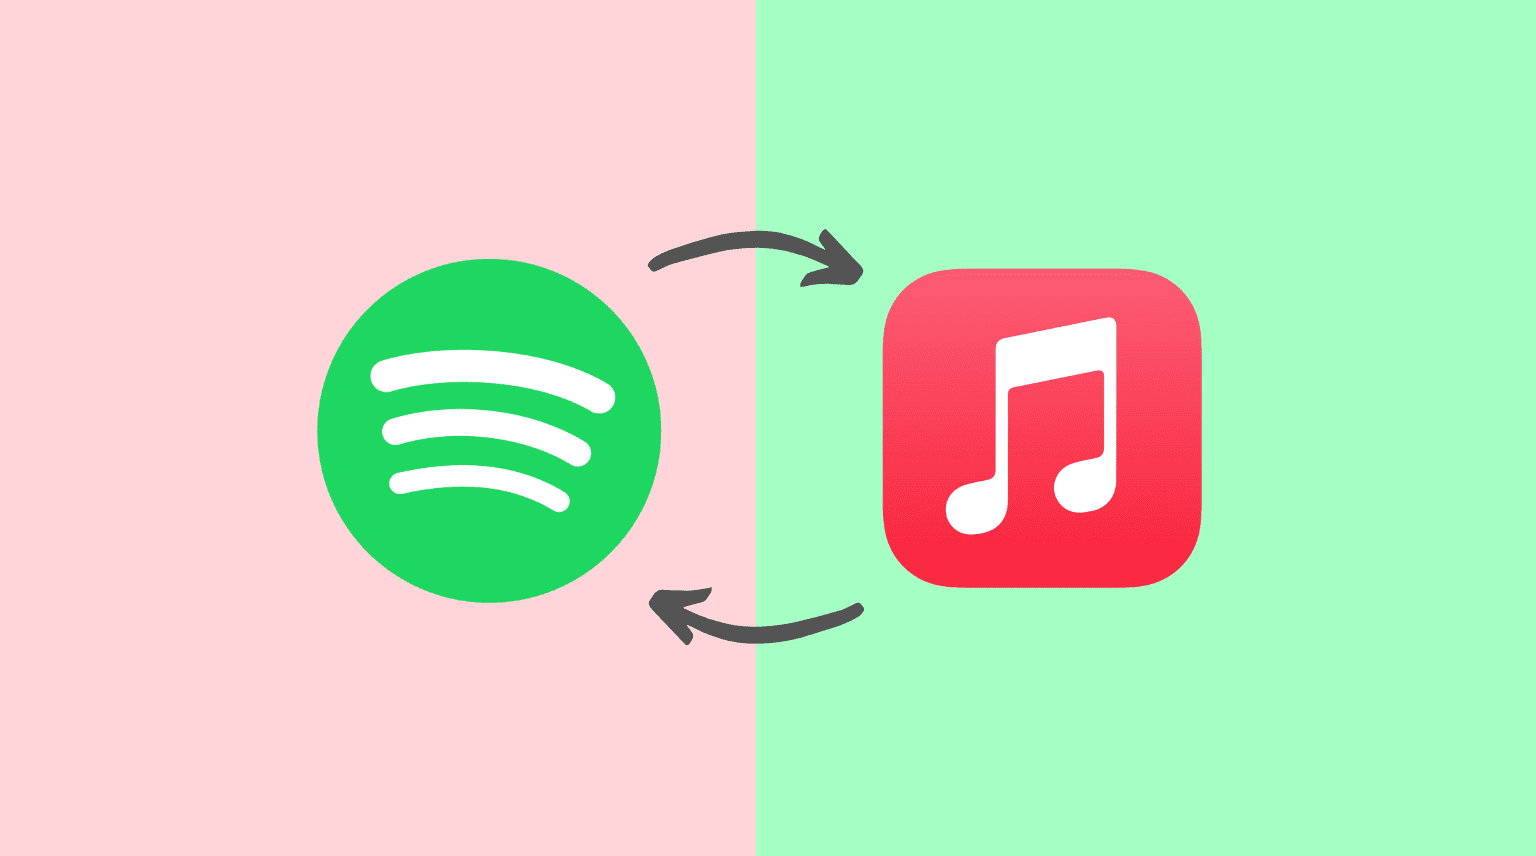 Spotify and Apple Music logos on light background with two arrows showing song transfer between them